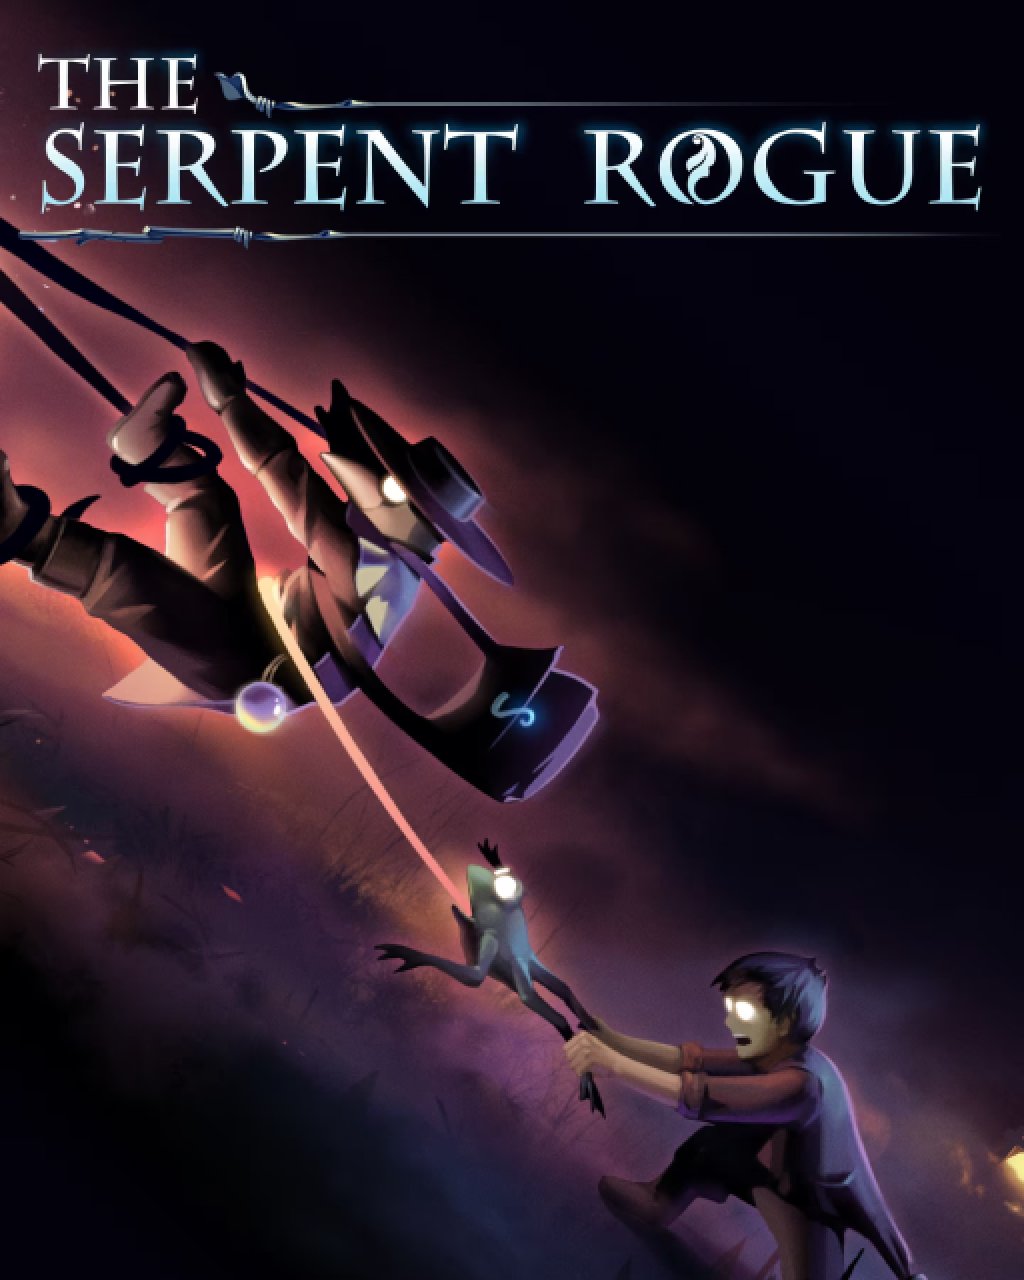 ESD The Serpent Rogue